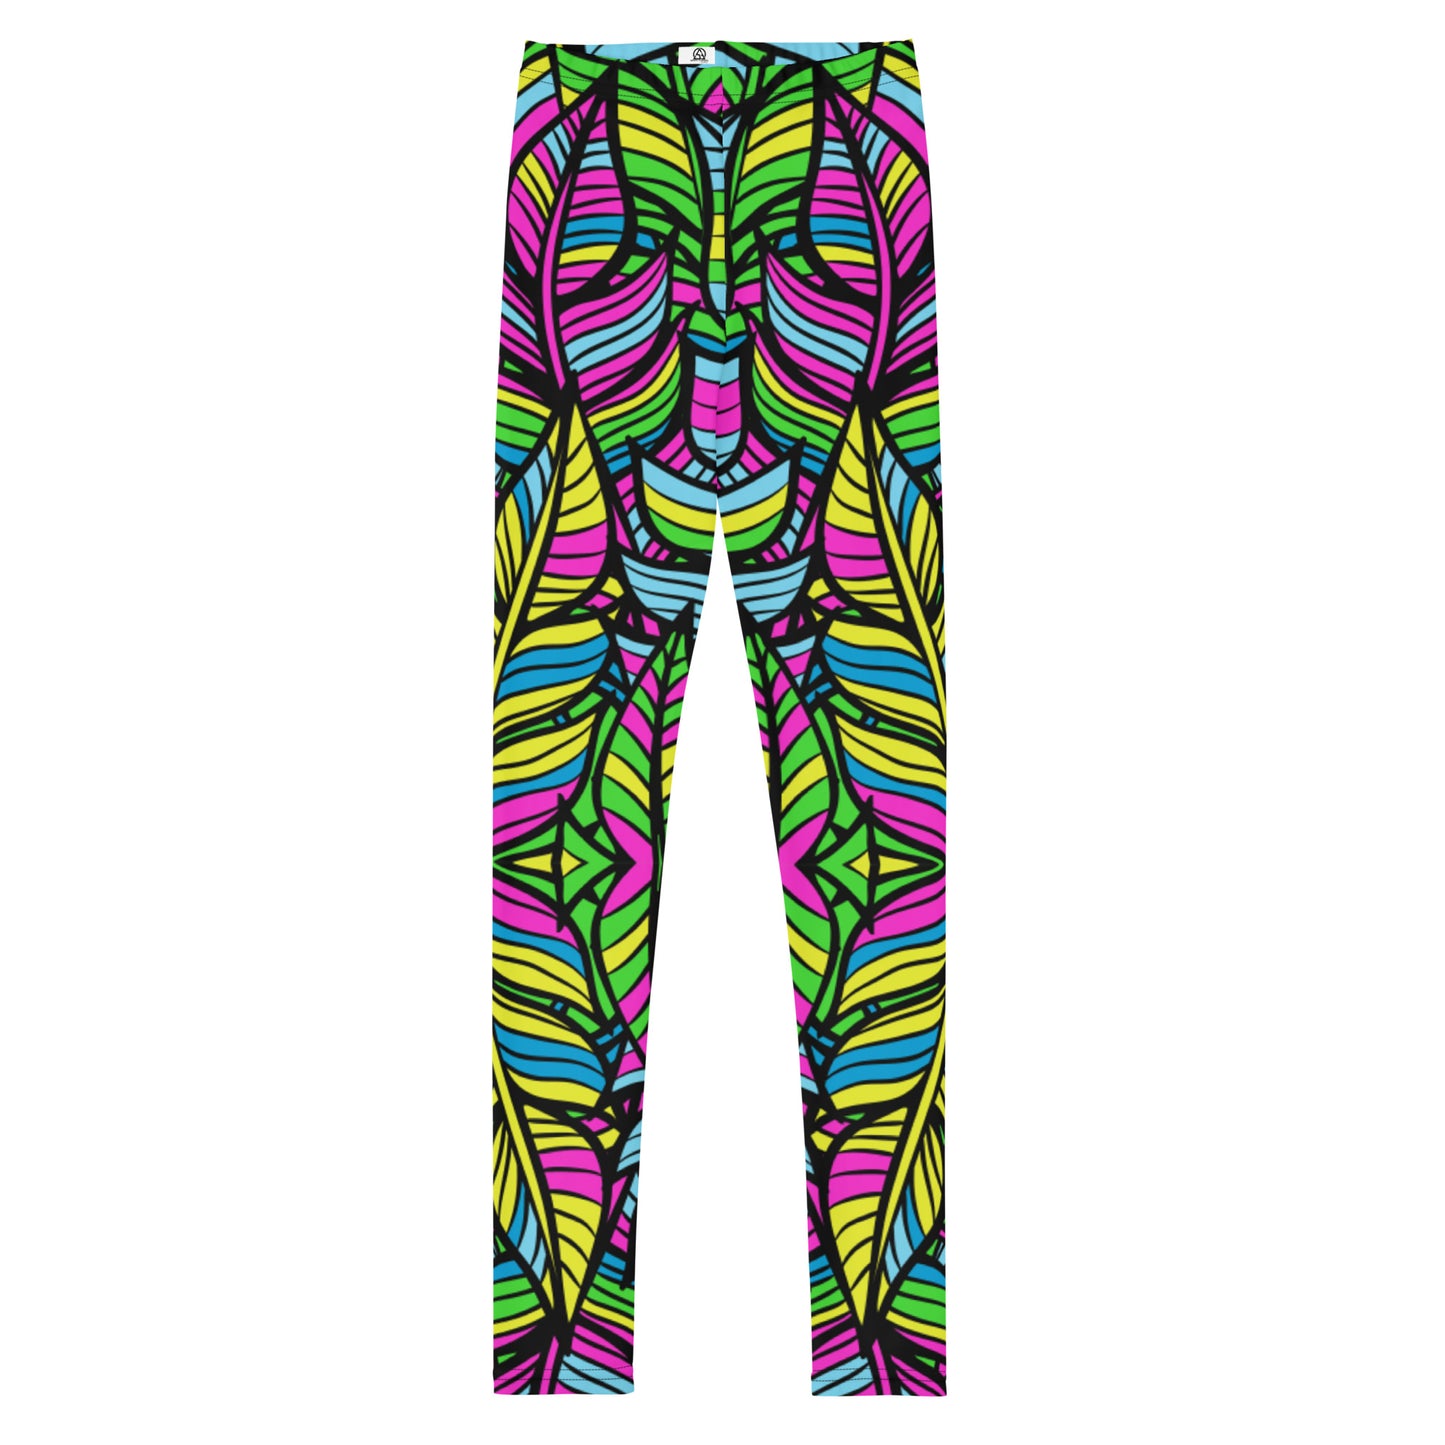 Neon Feathers print Youth Leggings - Sport Finesse